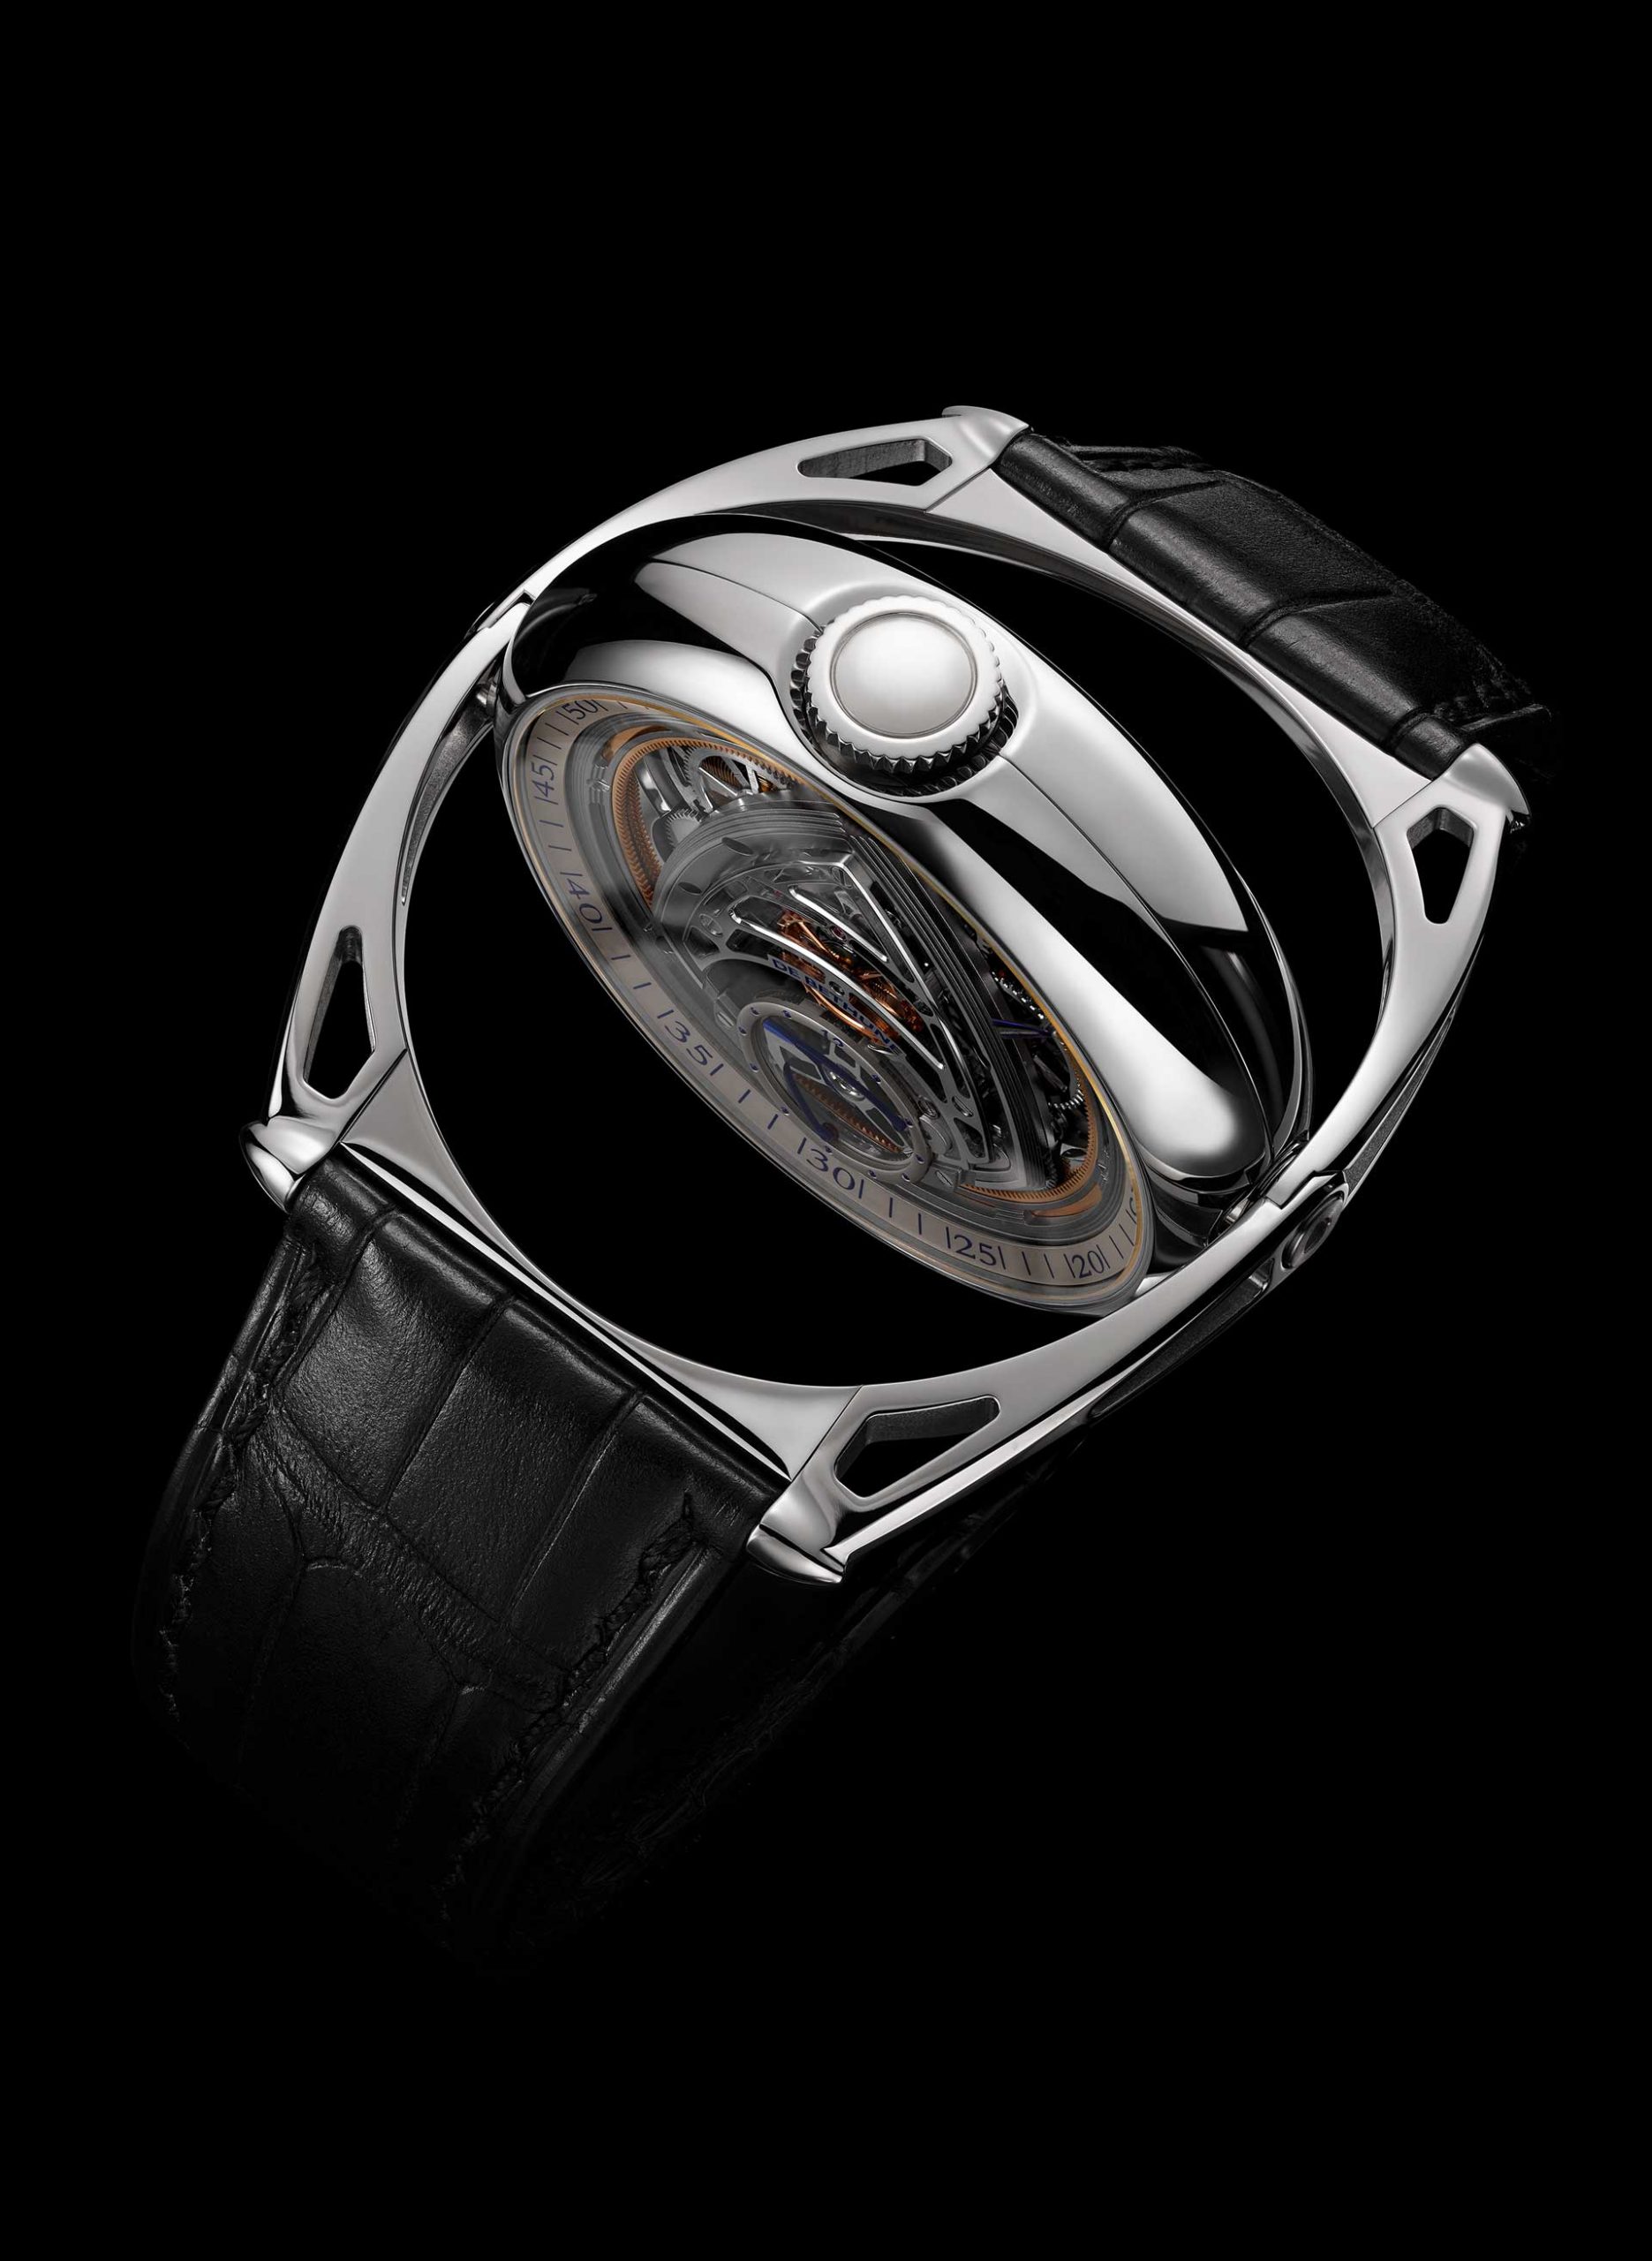 DeBethune-DB28-Kind-of-Two-Jumping-GMT-reversibile-Robb-Report-Italia